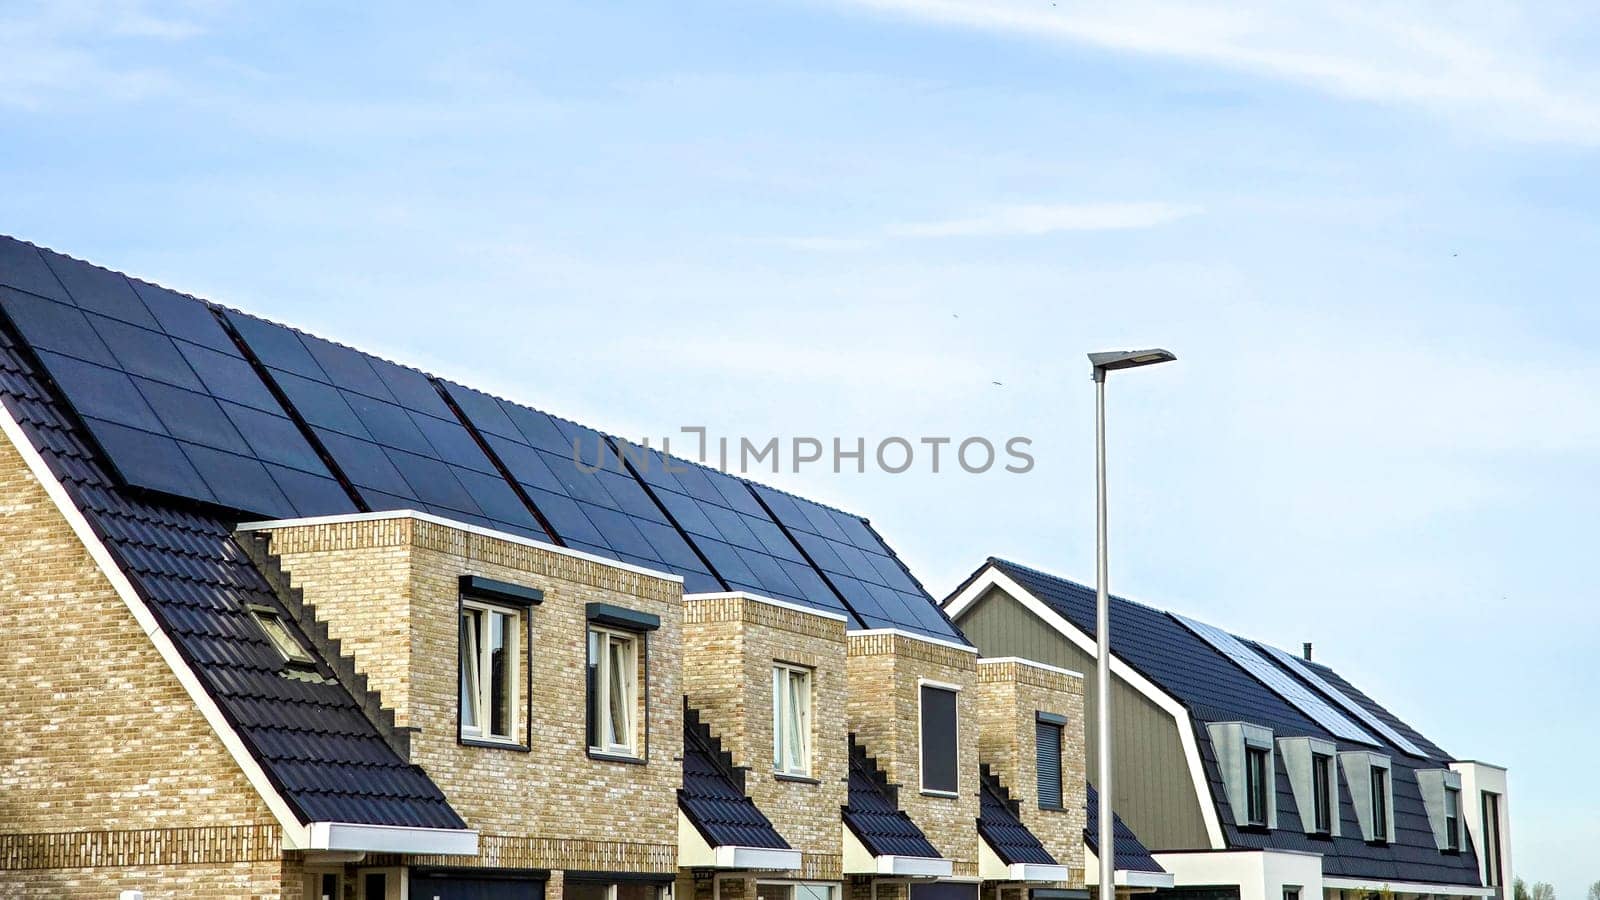 Newly build houses with solar panels attached on the roof against a sunny sky by fokkebok